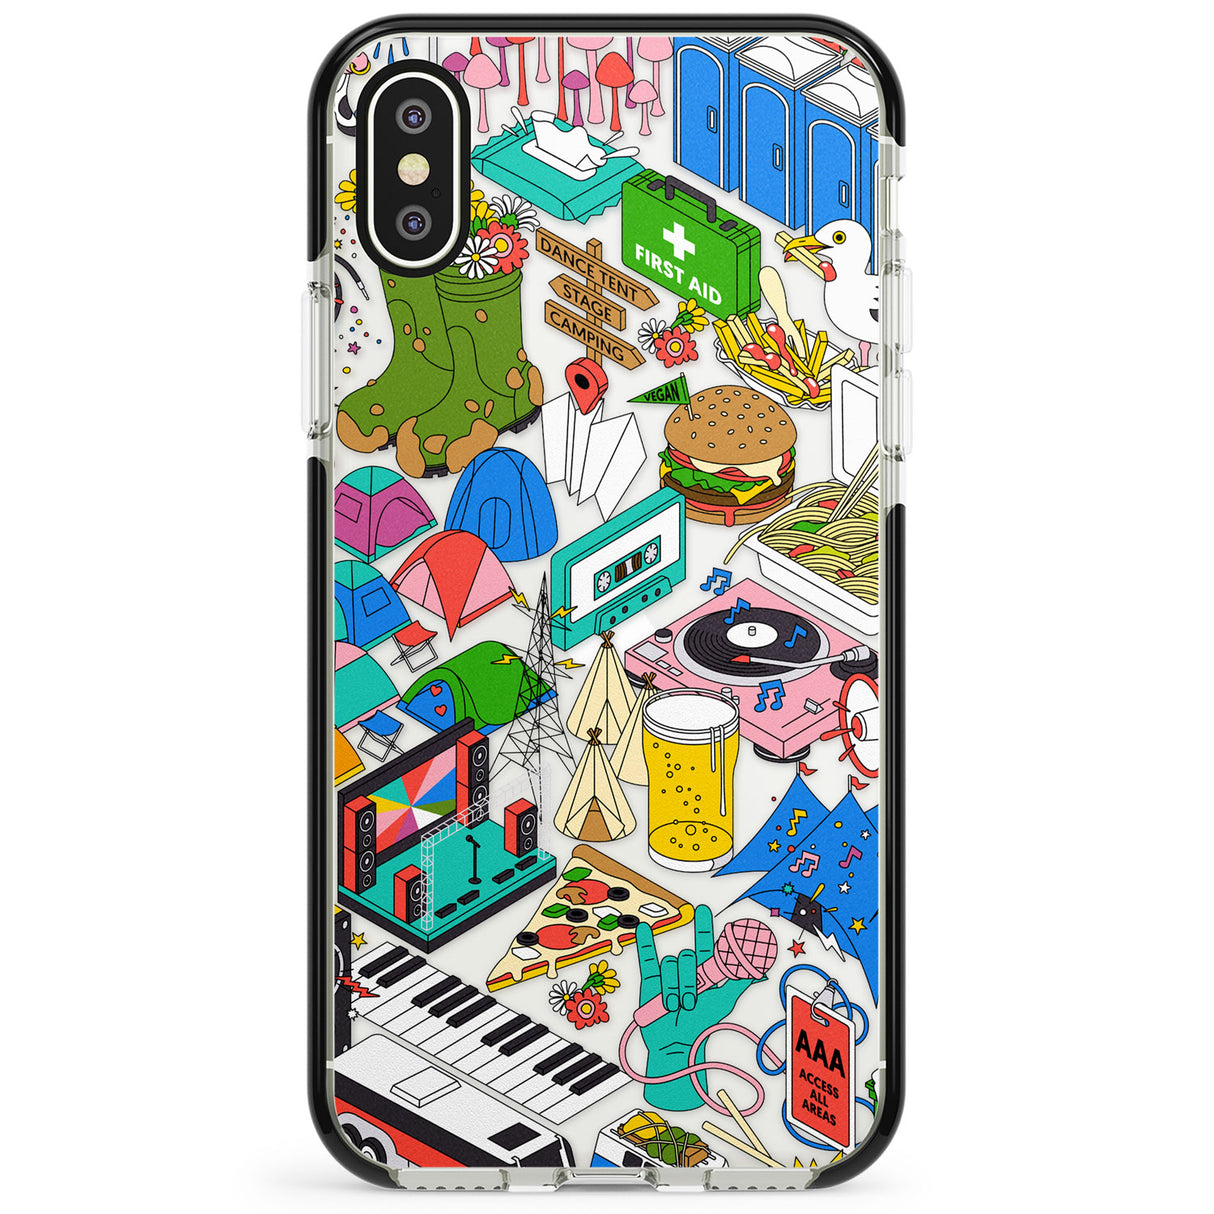 Festival Frenzy Phone Case for iPhone X XS Max XR